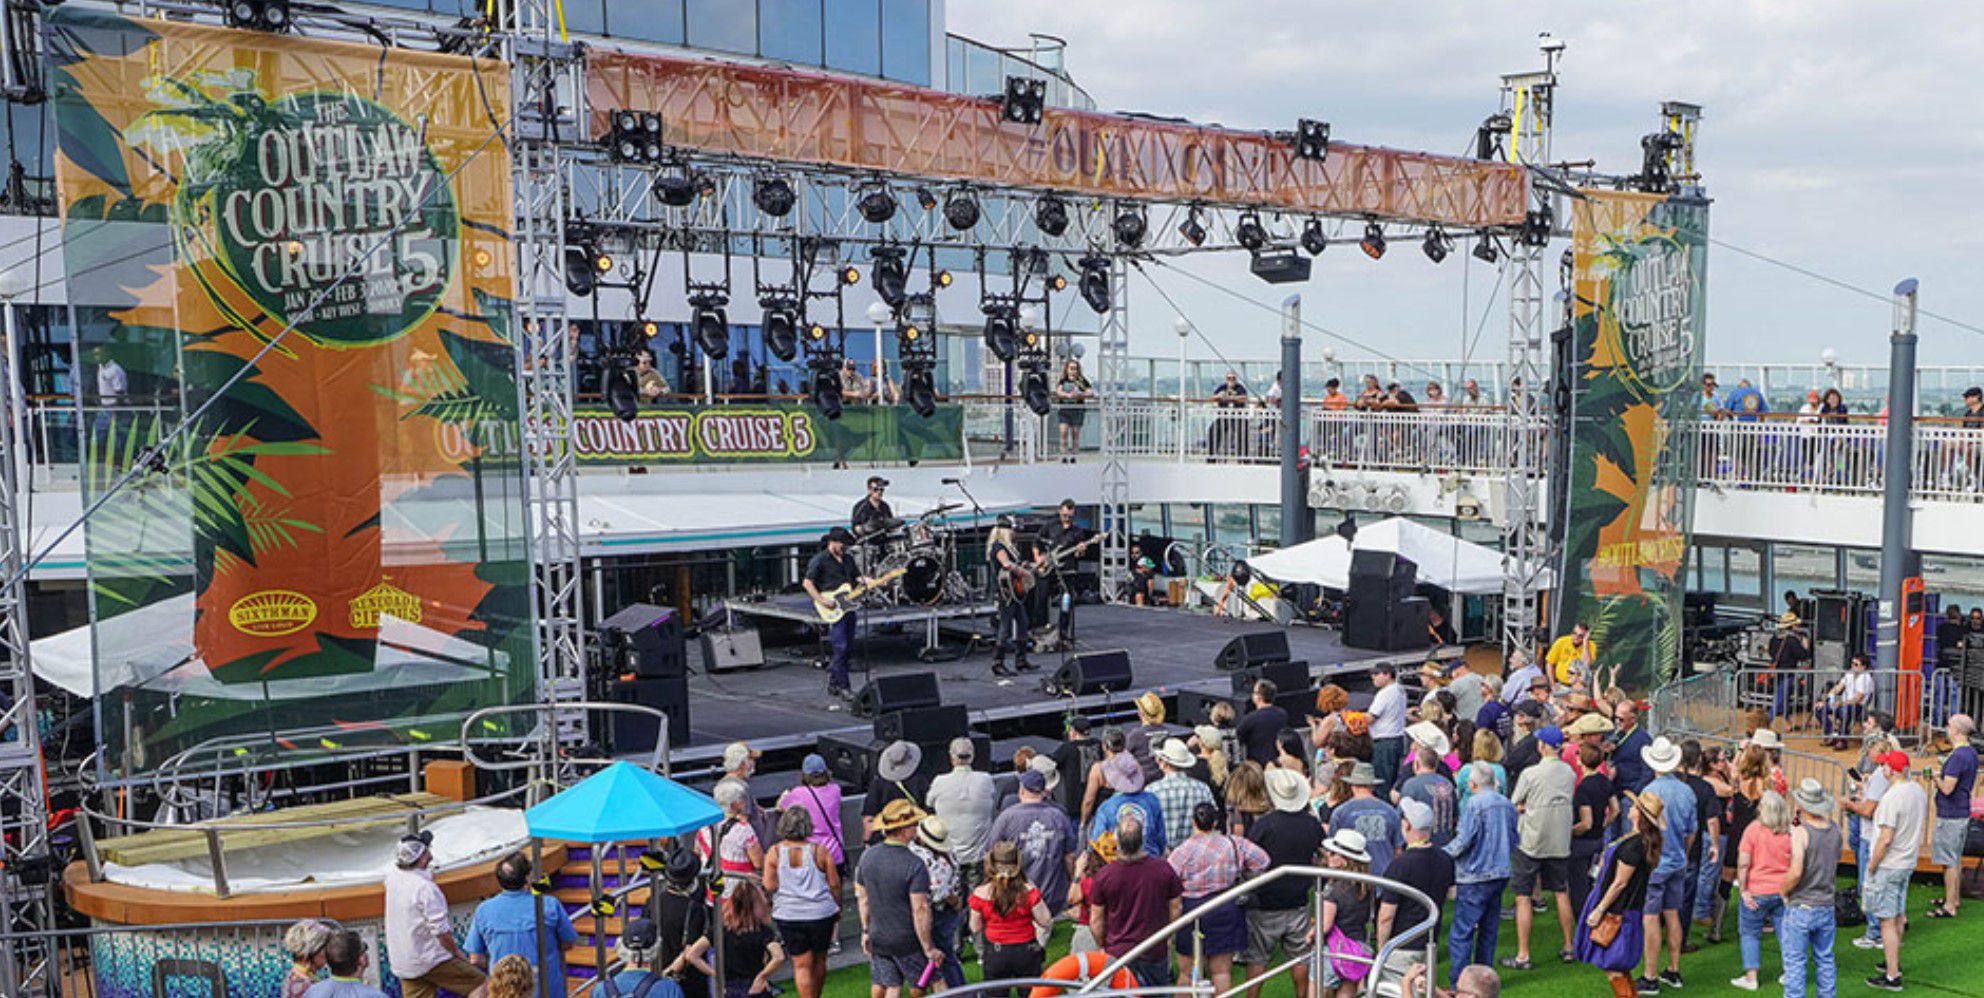 <p>Organized by the dynamic duo, Sixthman, and SiriusXM's <a href="https://www.outlawcountrycruise.com/">Outlaw Country,</a>this isn't your grandma's shuffleboard-at-sea experience. Nope. It's a foot-tapping, guitar-strumming voyage that changes its lineup faster than a jukebox on a Saturday night. Different artists. Different stops. Each year offers a fresh spin. But how to stay in the know? Dive into their official website or plug into SiriusXM's Outlaw Country channel. And just remember, in this case, what happens at sea might just end up in a country song. Bummer alert: The Outlaw Country Cruise for 2024 is sold out, but there's a waiting list on their official website if you're hoping for a spot! </p>